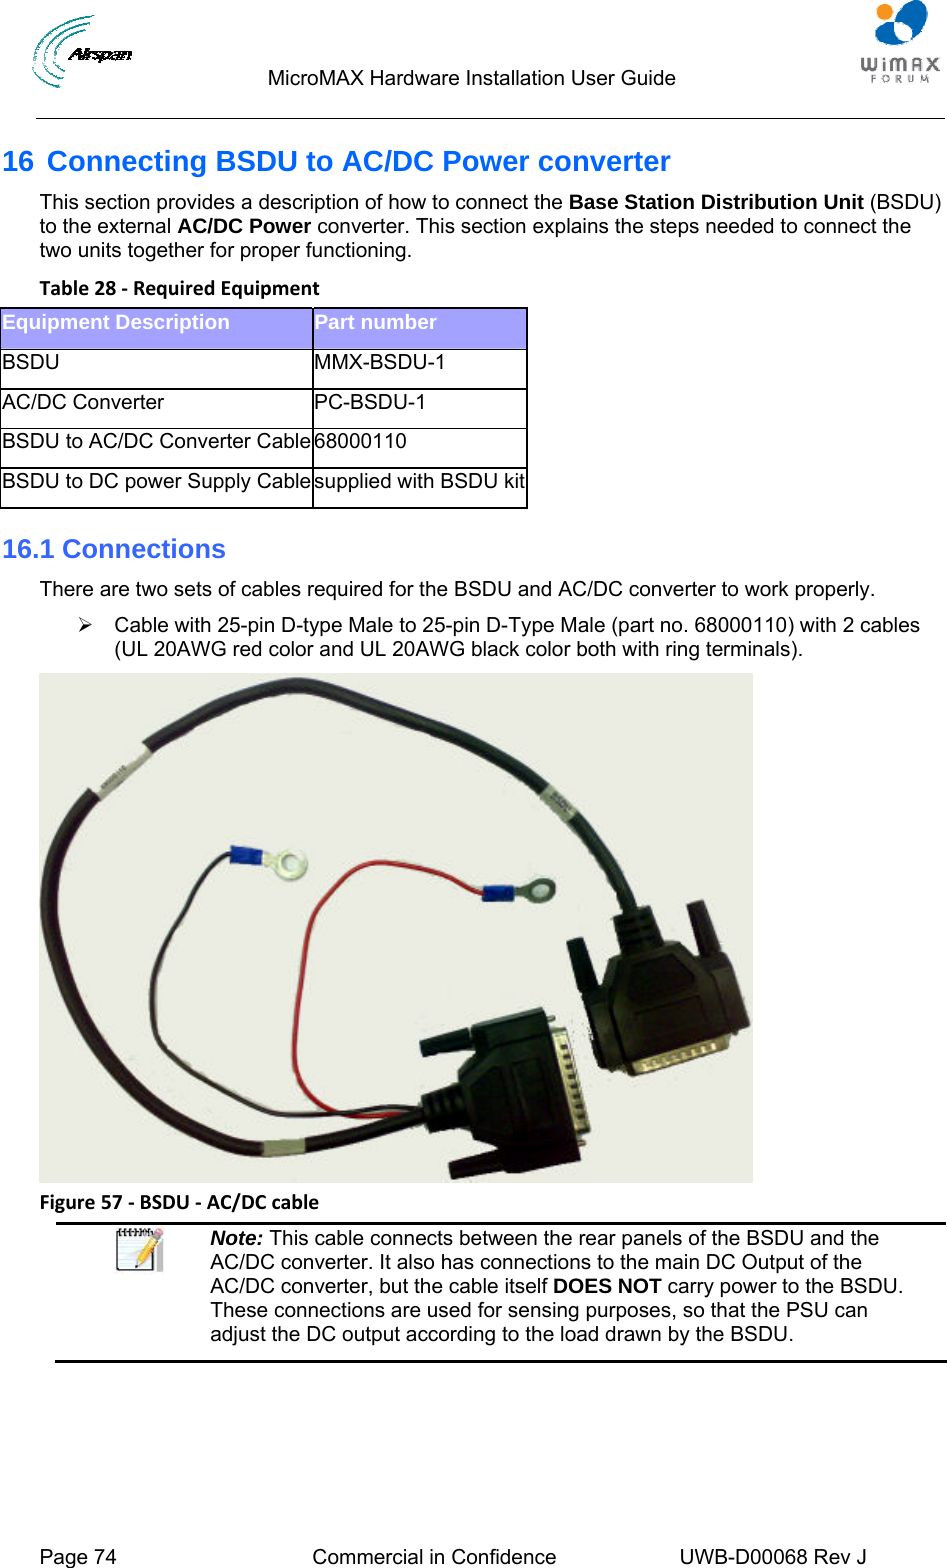                                  MicroMAX Hardware Installation User Guide  Page 74  Commercial in Confidence  UWB-D00068 Rev J   16 Connecting BSDU to AC/DC Power converter This section provides a description of how to connect the Base Station Distribution Unit (BSDU) to the external AC/DC Power converter. This section explains the steps needed to connect the two units together for proper functioning. Table28‐RequiredEquipmentEquipment Description   Part number BSDU MMX-BSDU-1 AC/DC Converter  PC-BSDU-1 BSDU to AC/DC Converter Cable 68000110 BSDU to DC power Supply Cable supplied with BSDU kit16.1 Connections There are two sets of cables required for the BSDU and AC/DC converter to work properly. ¾  Cable with 25-pin D-type Male to 25-pin D-Type Male (part no. 68000110) with 2 cables (UL 20AWG red color and UL 20AWG black color both with ring terminals).  Figure57‐BSDU‐AC/DCcable Note: This cable connects between the rear panels of the BSDU and the AC/DC converter. It also has connections to the main DC Output of the AC/DC converter, but the cable itself DOES NOT carry power to the BSDU. These connections are used for sensing purposes, so that the PSU can adjust the DC output according to the load drawn by the BSDU.  